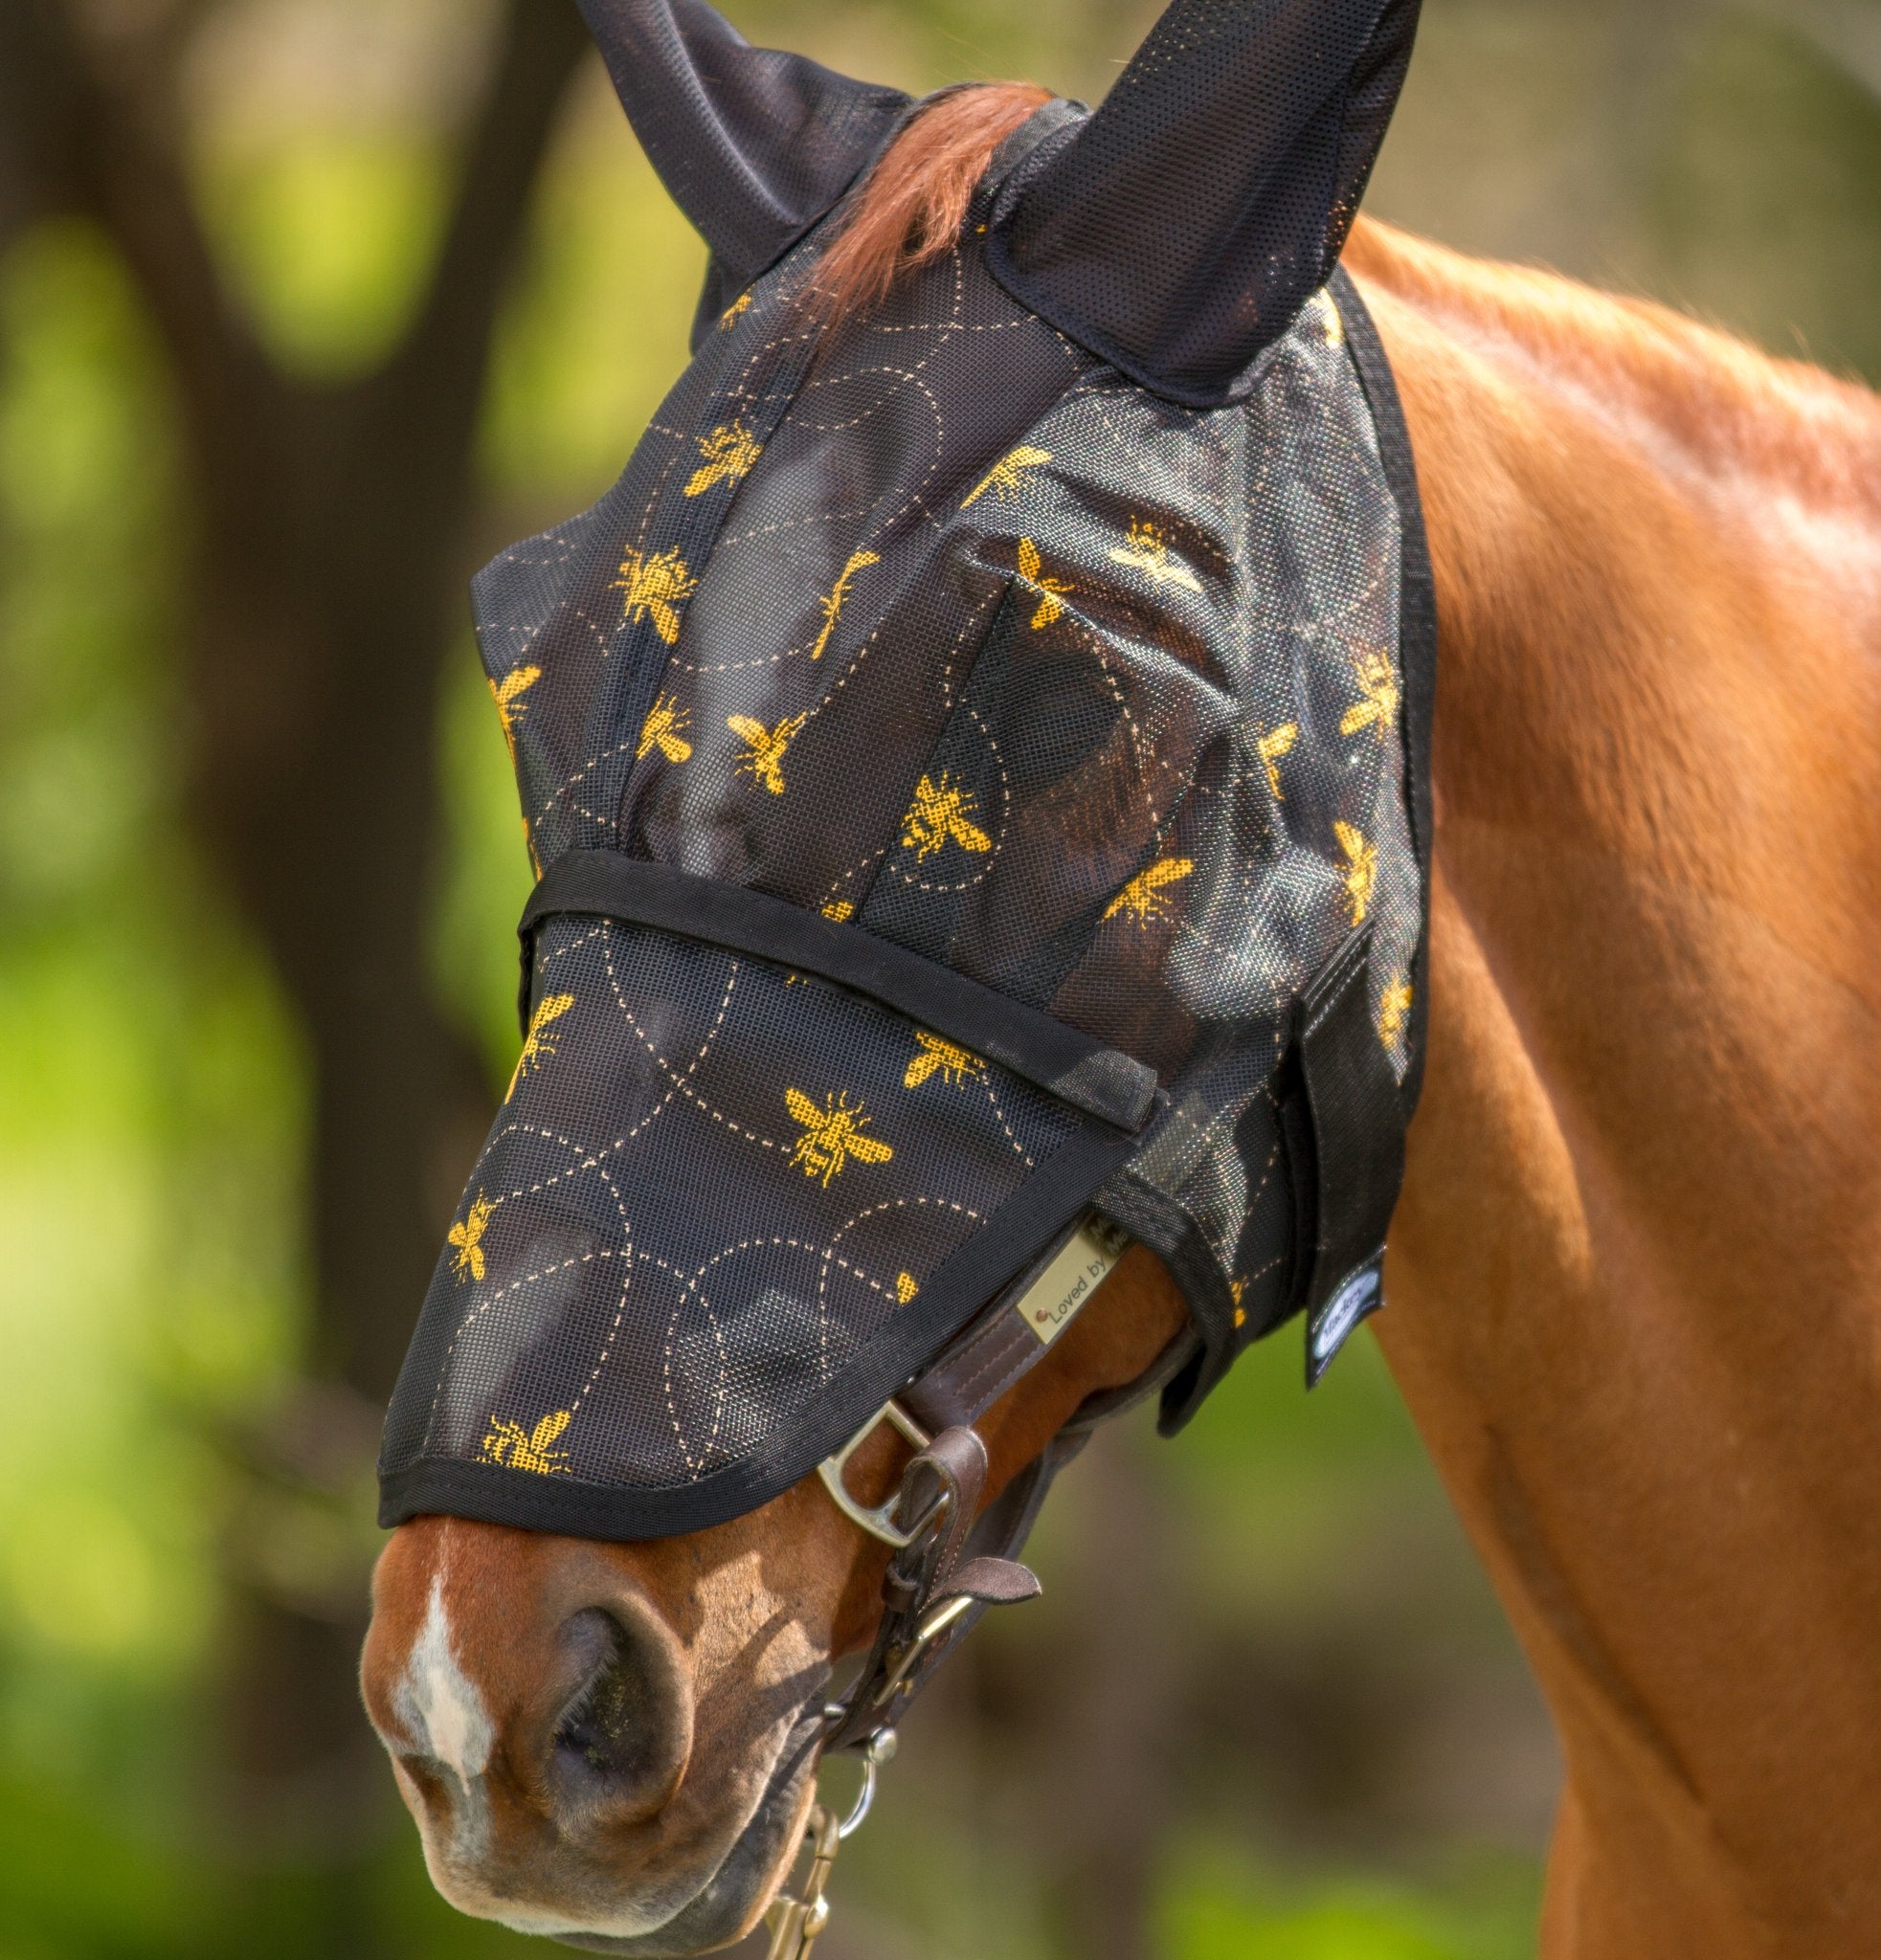 Mackey Bee Mine Fly Mask With Ears And Detachable Nose